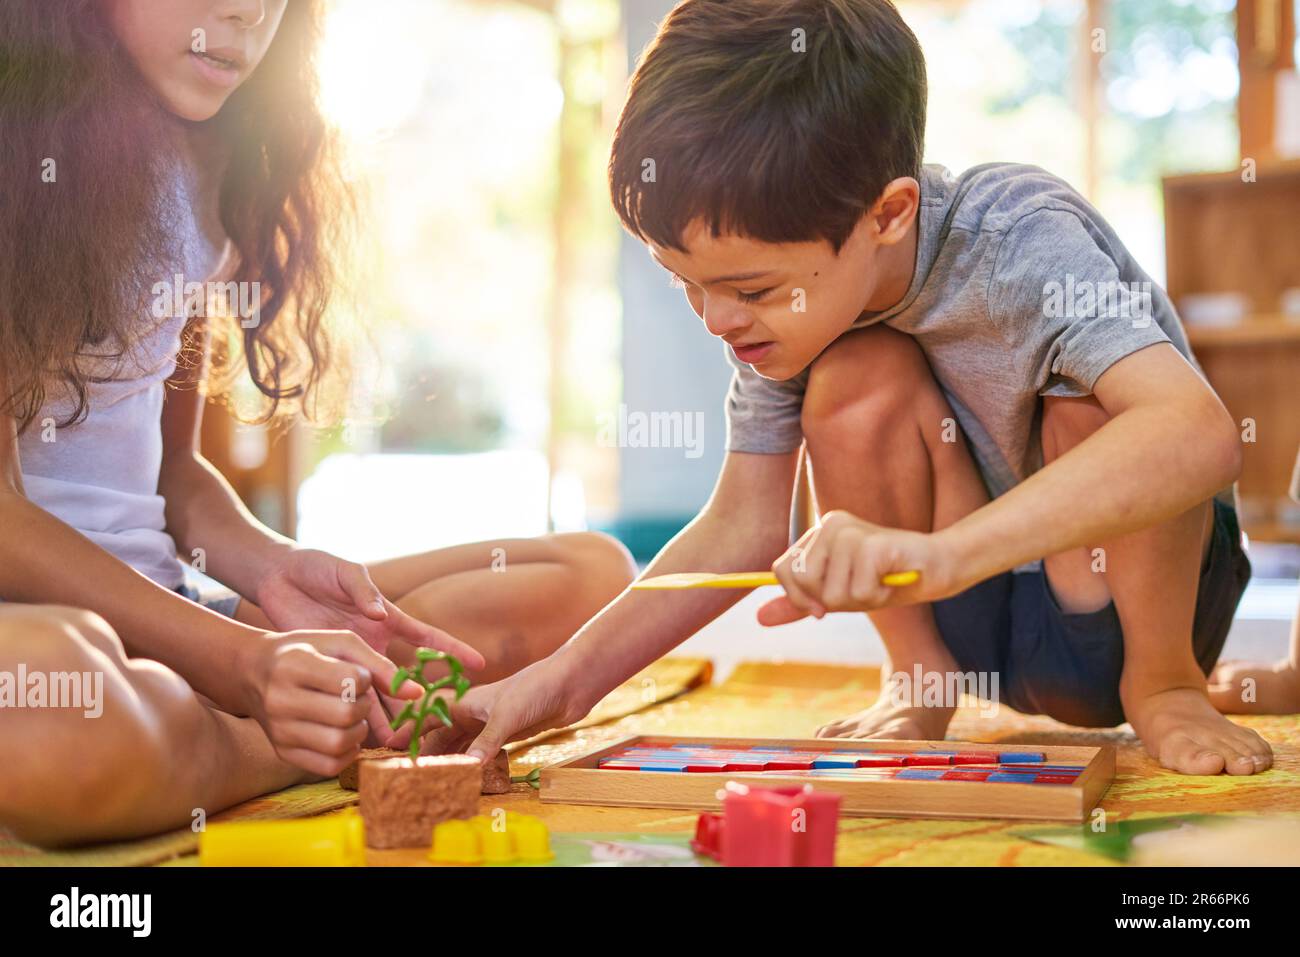 Sister watching brother with Down Syndrome playing with toys on floor Stock Photo